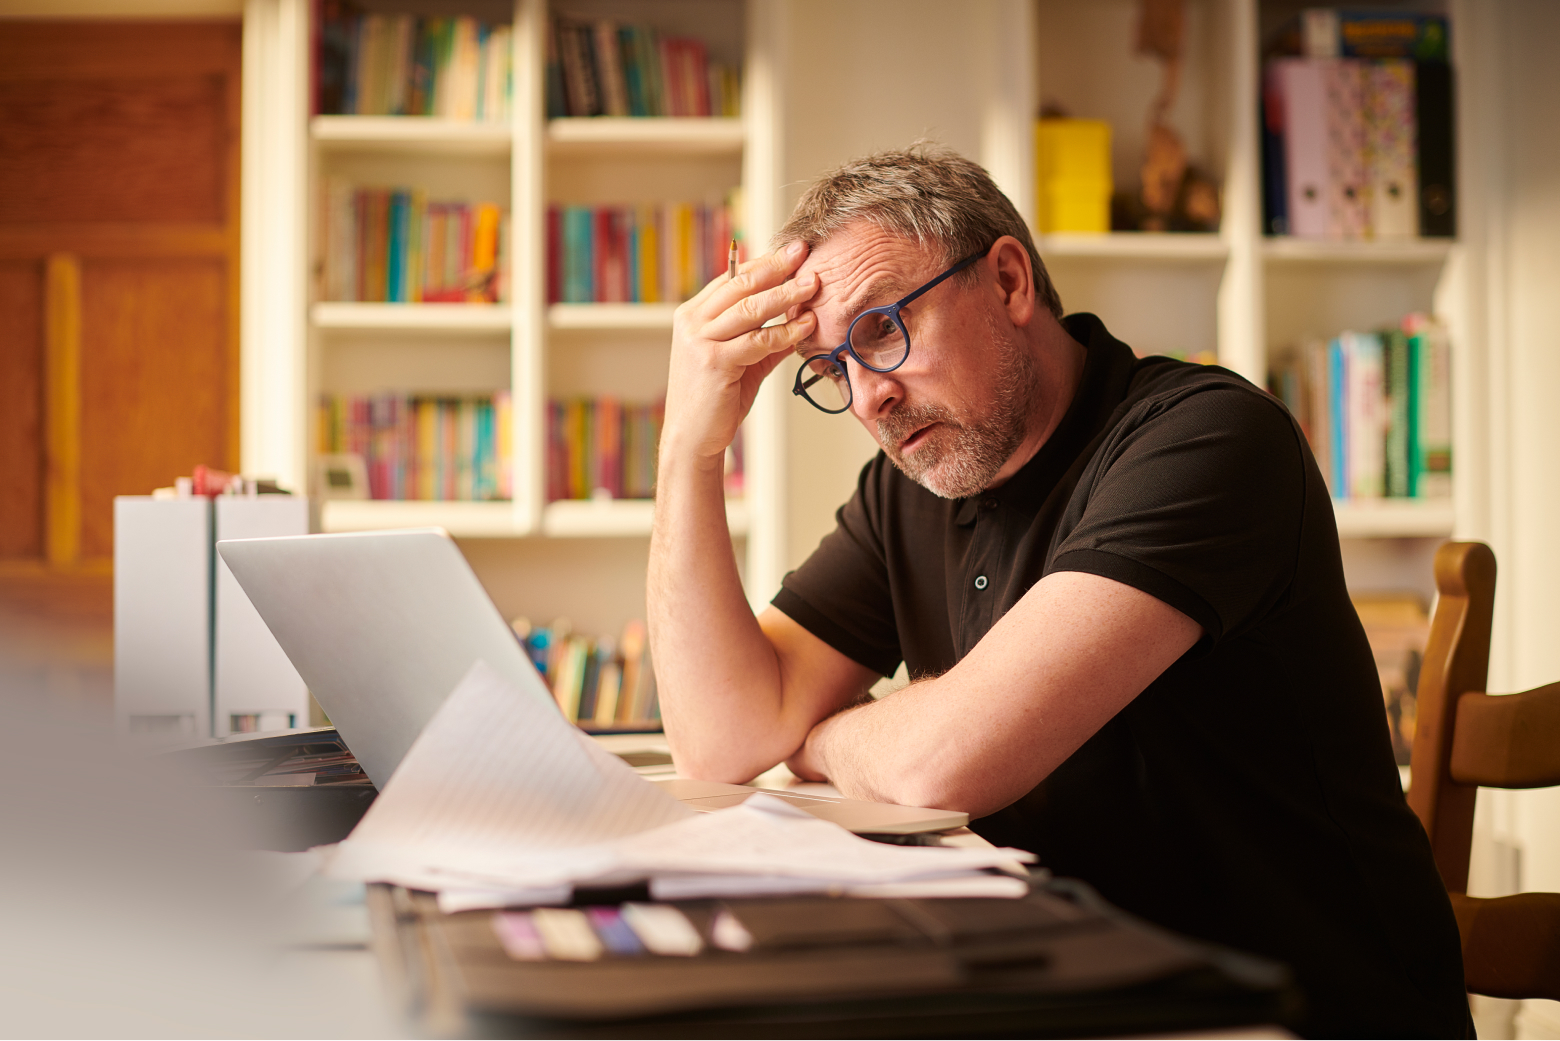 A self-employed person rubs his forehead in frustration as he contemplates his financial plan